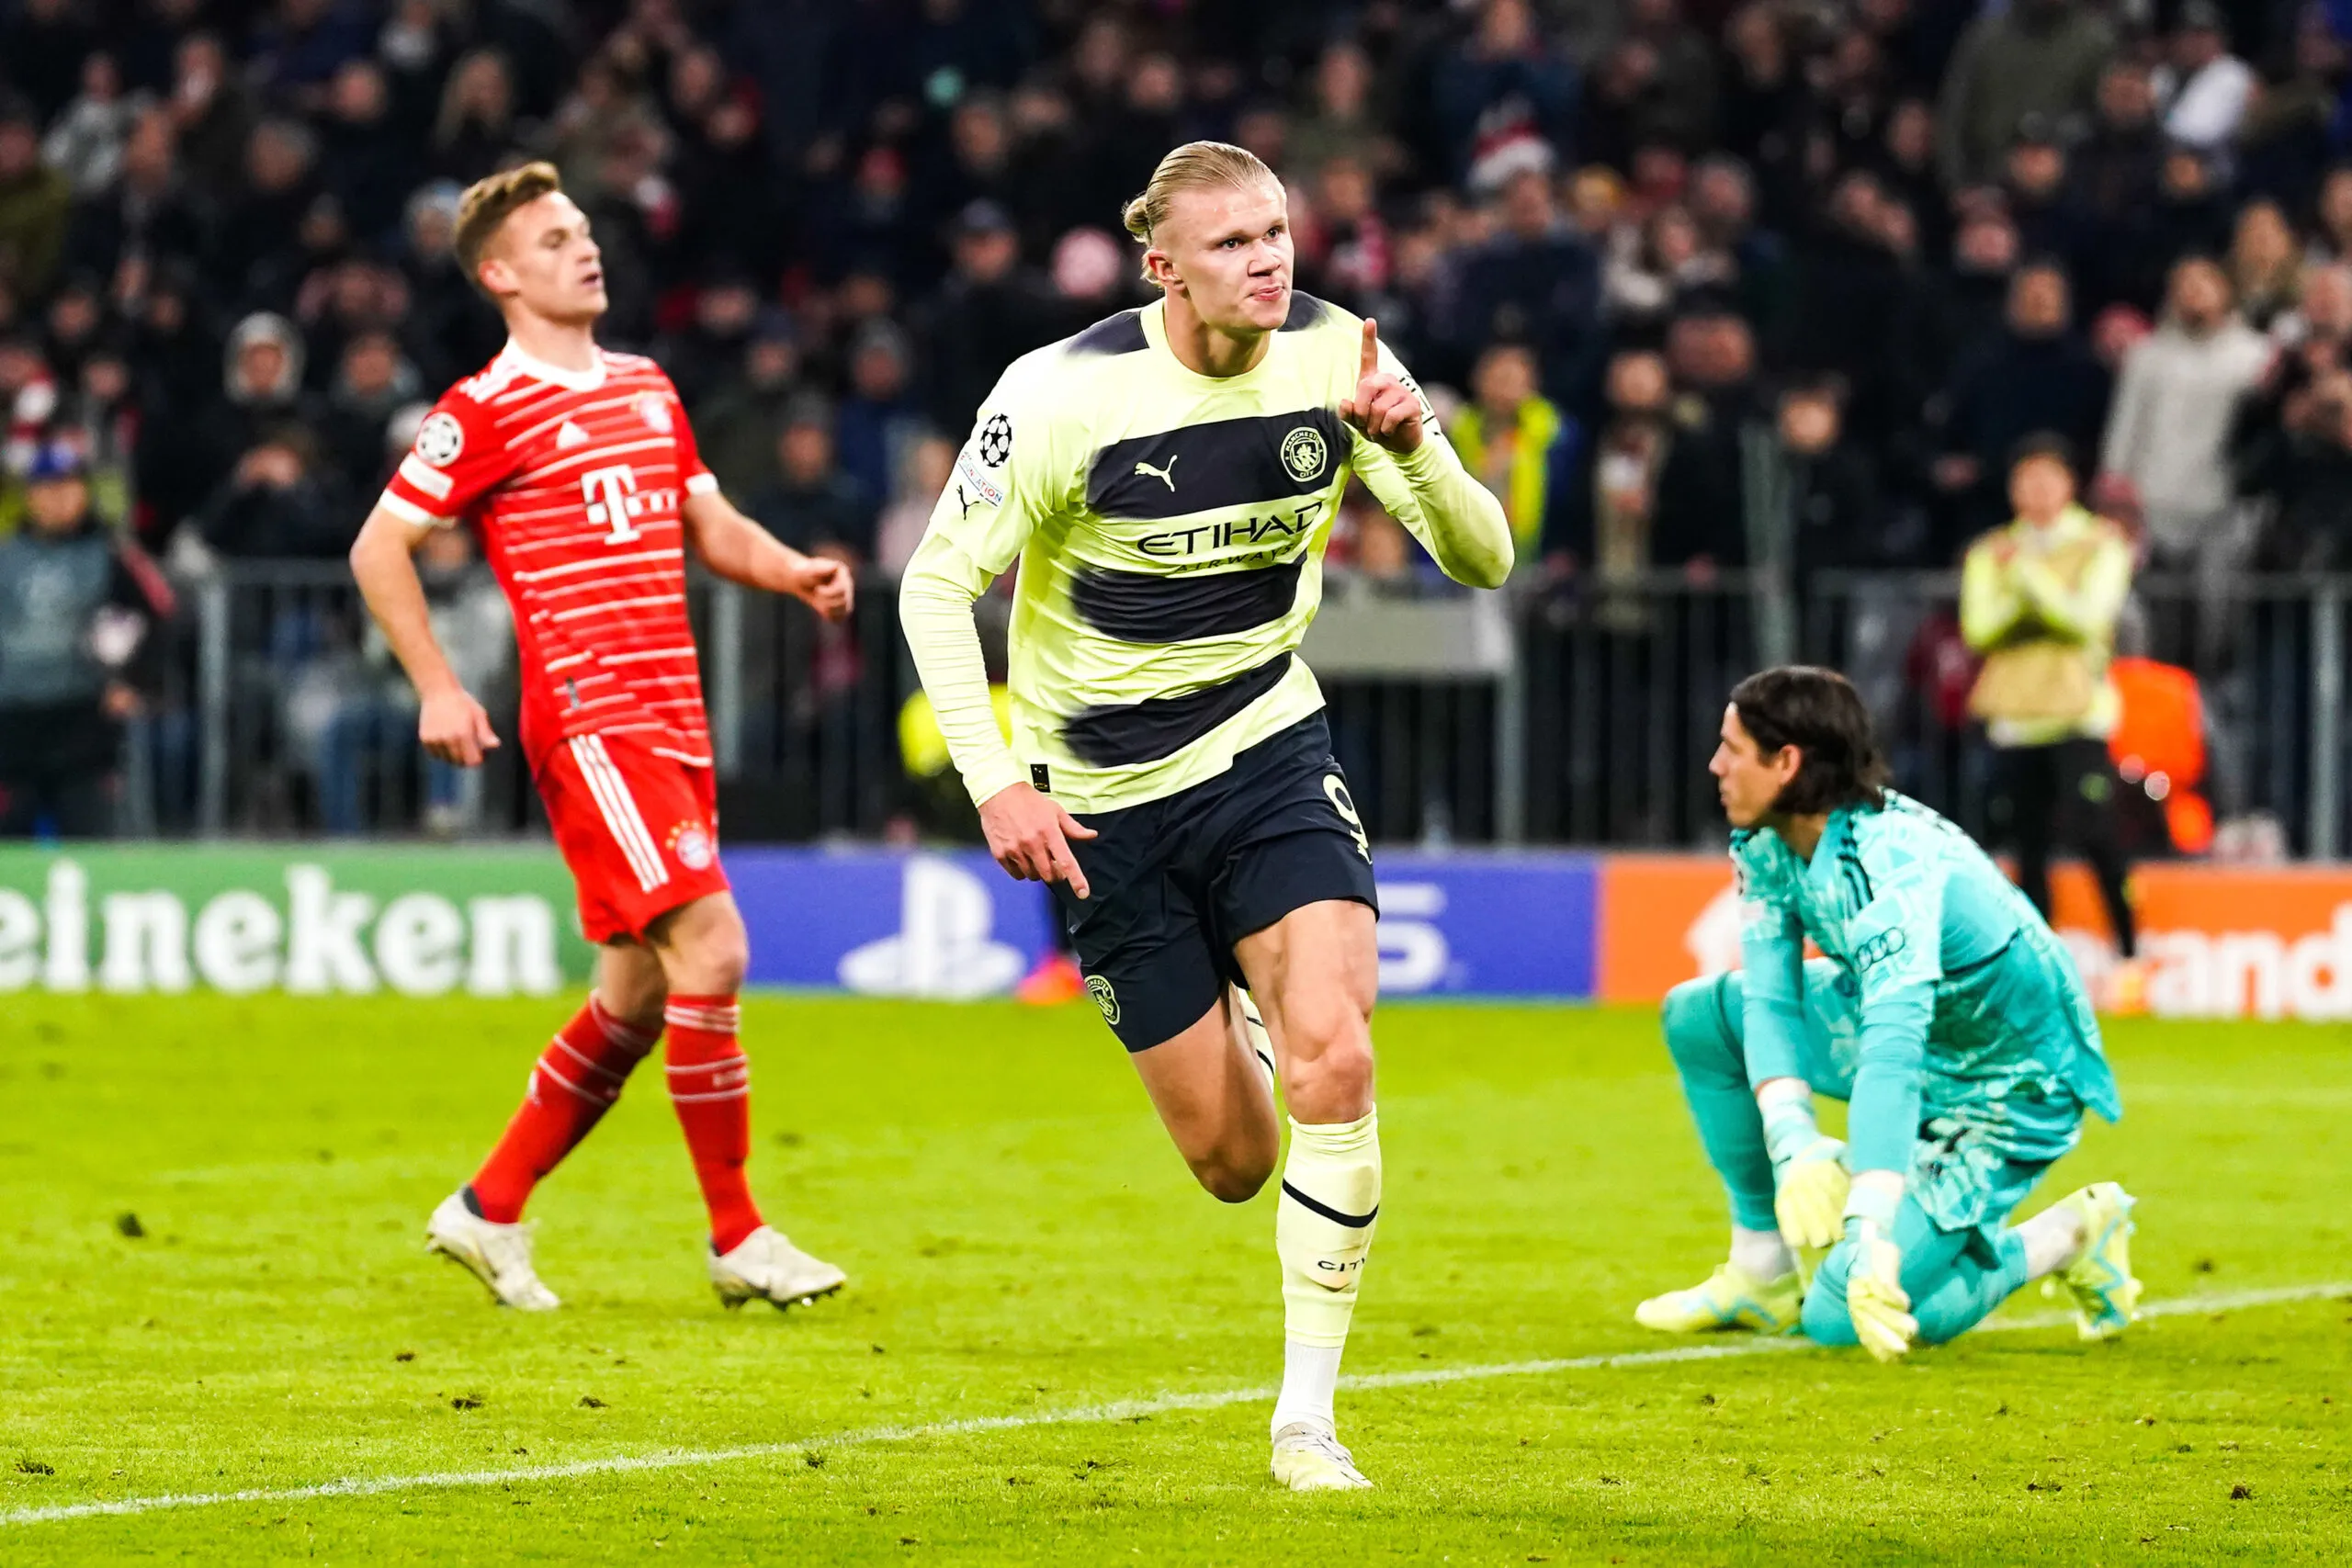 Manchester City's Erling Haaland celebrates scoring their side's first goal of the game during the UEFA Champions League quarter-final second leg match at Allianz Arena, Munich. Picture date: Wednesday April 19, 2023. - Photo by Icon sport